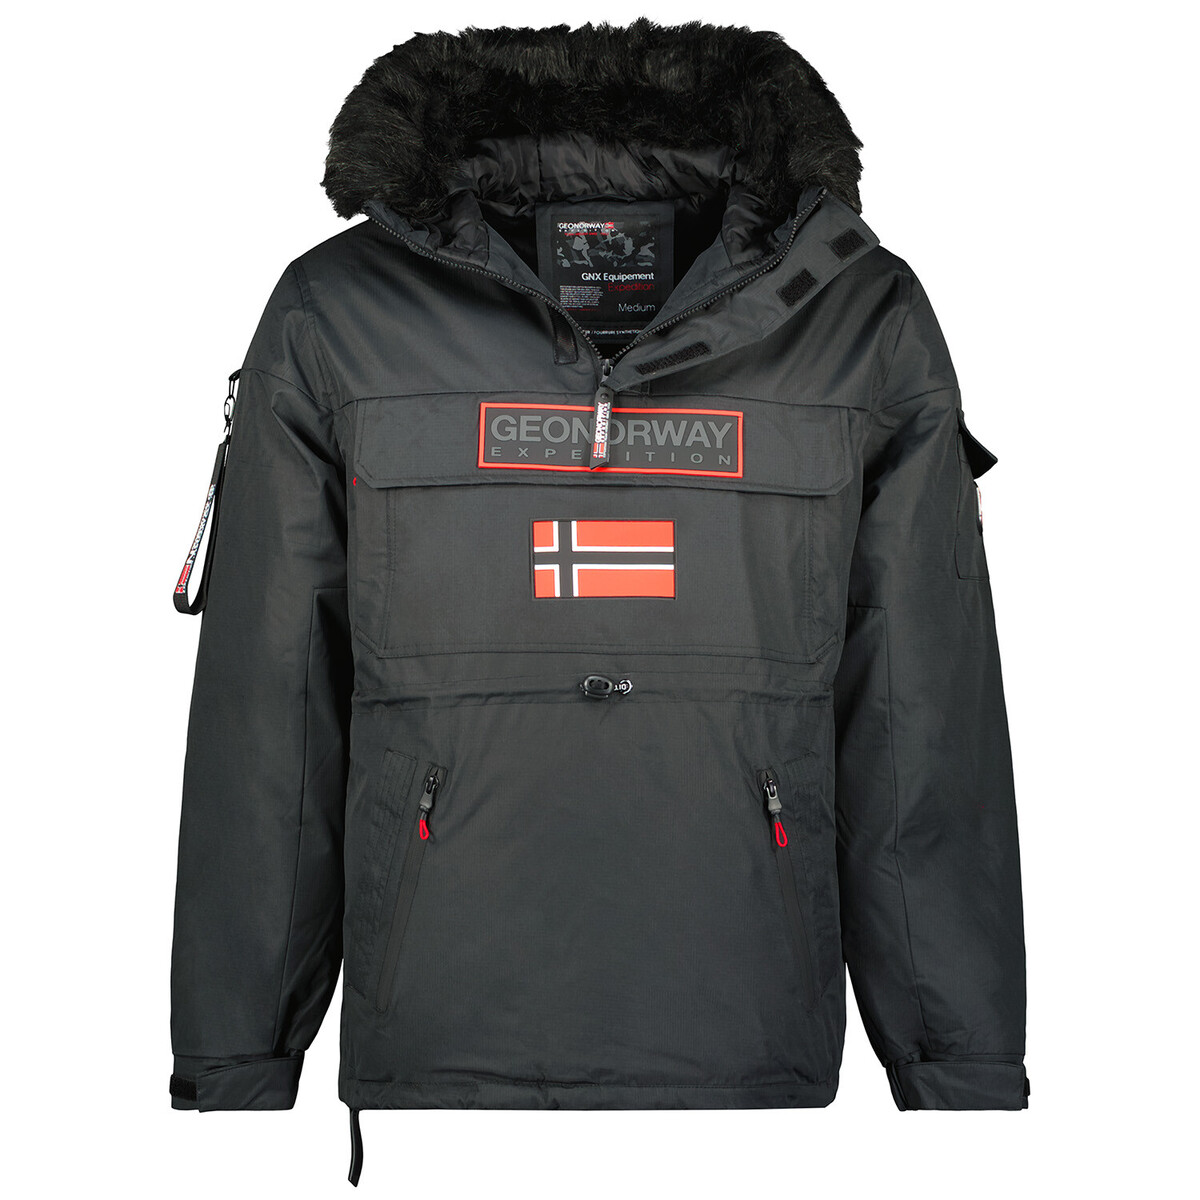 Geographical Norway Noir BRUNO Wj0OAeUc